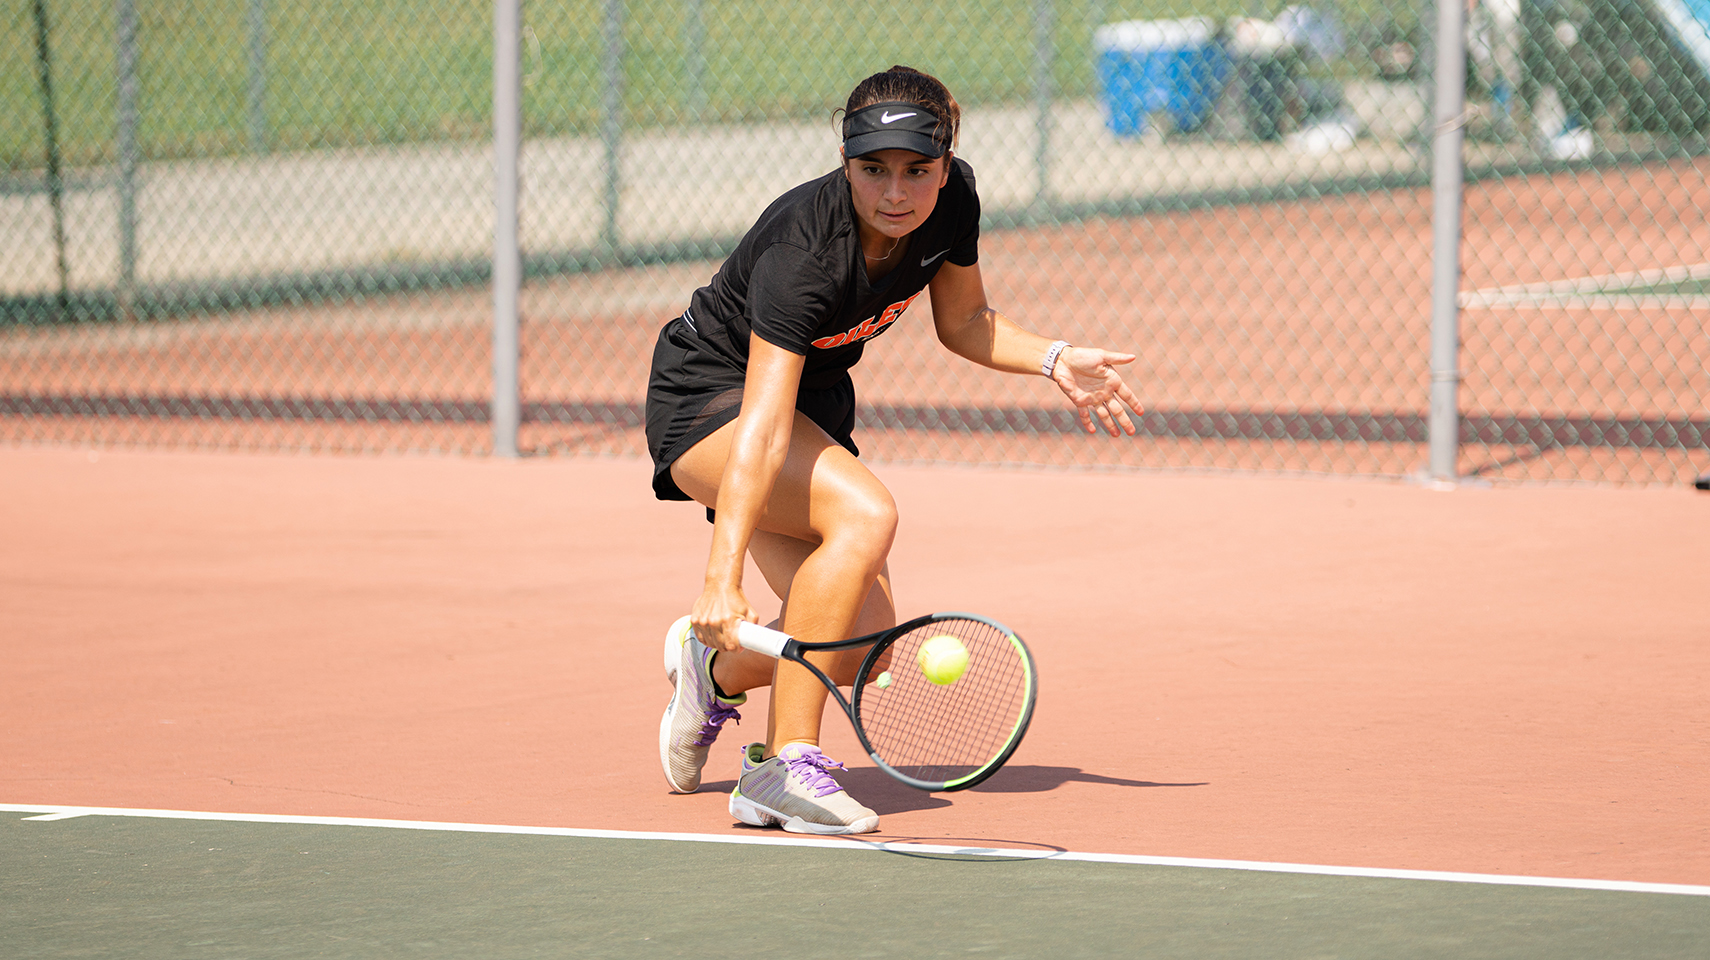 Women's tennis player reaching low to hit the ball